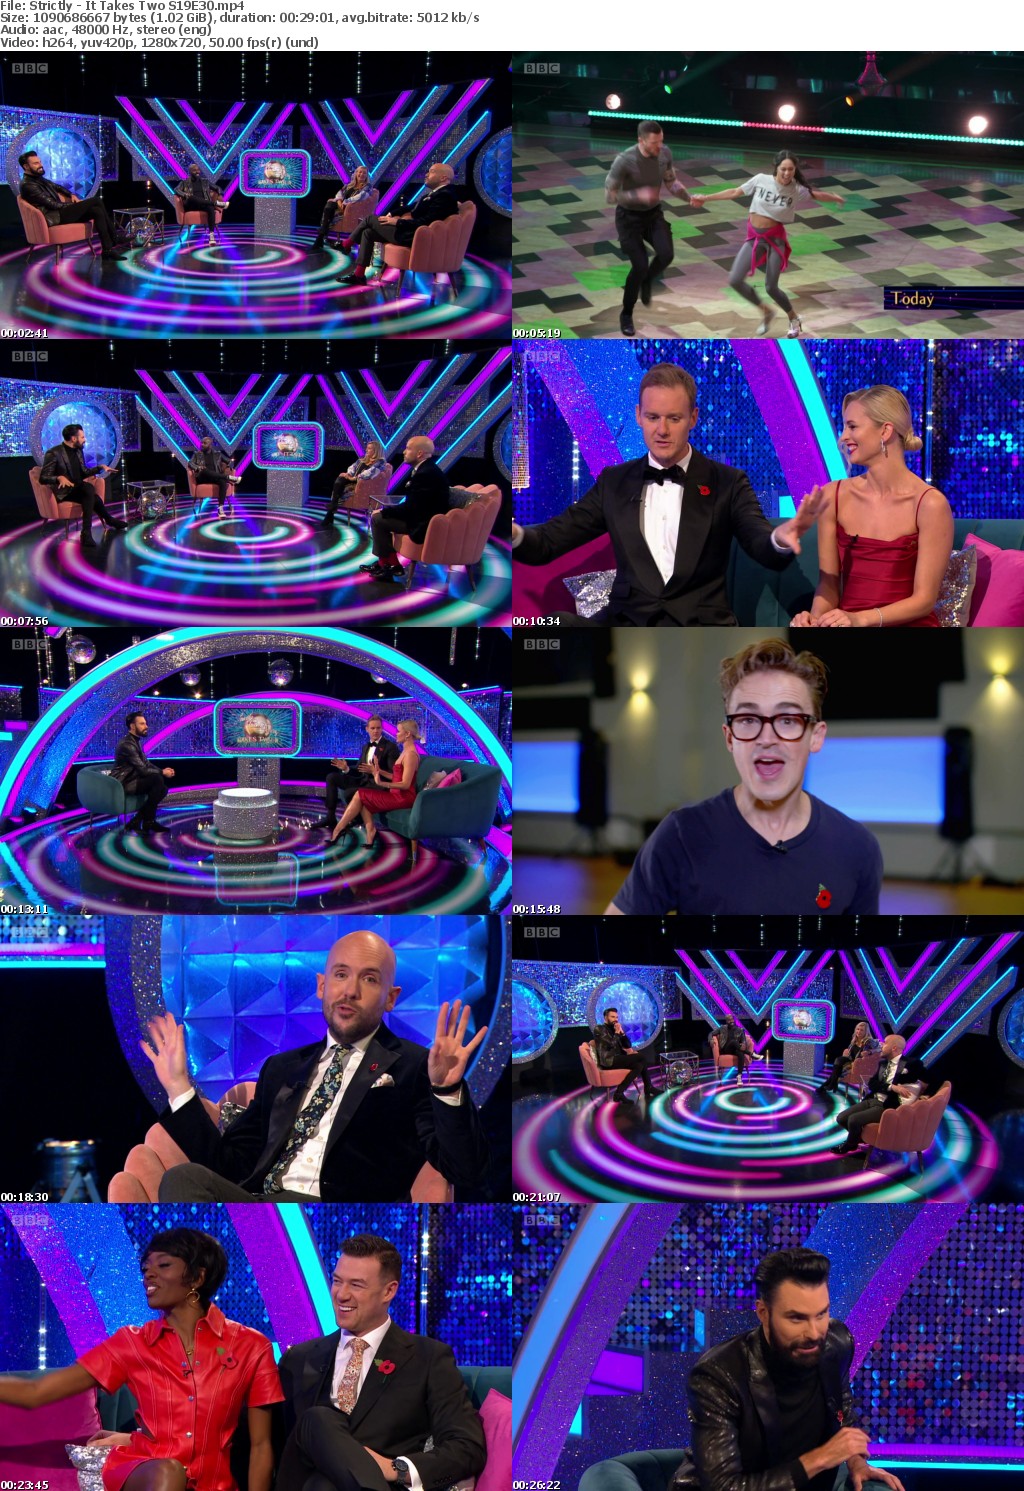 Strictly - It Takes Two S19E30 (1280x720p HD, 50fps, soft Eng subs)